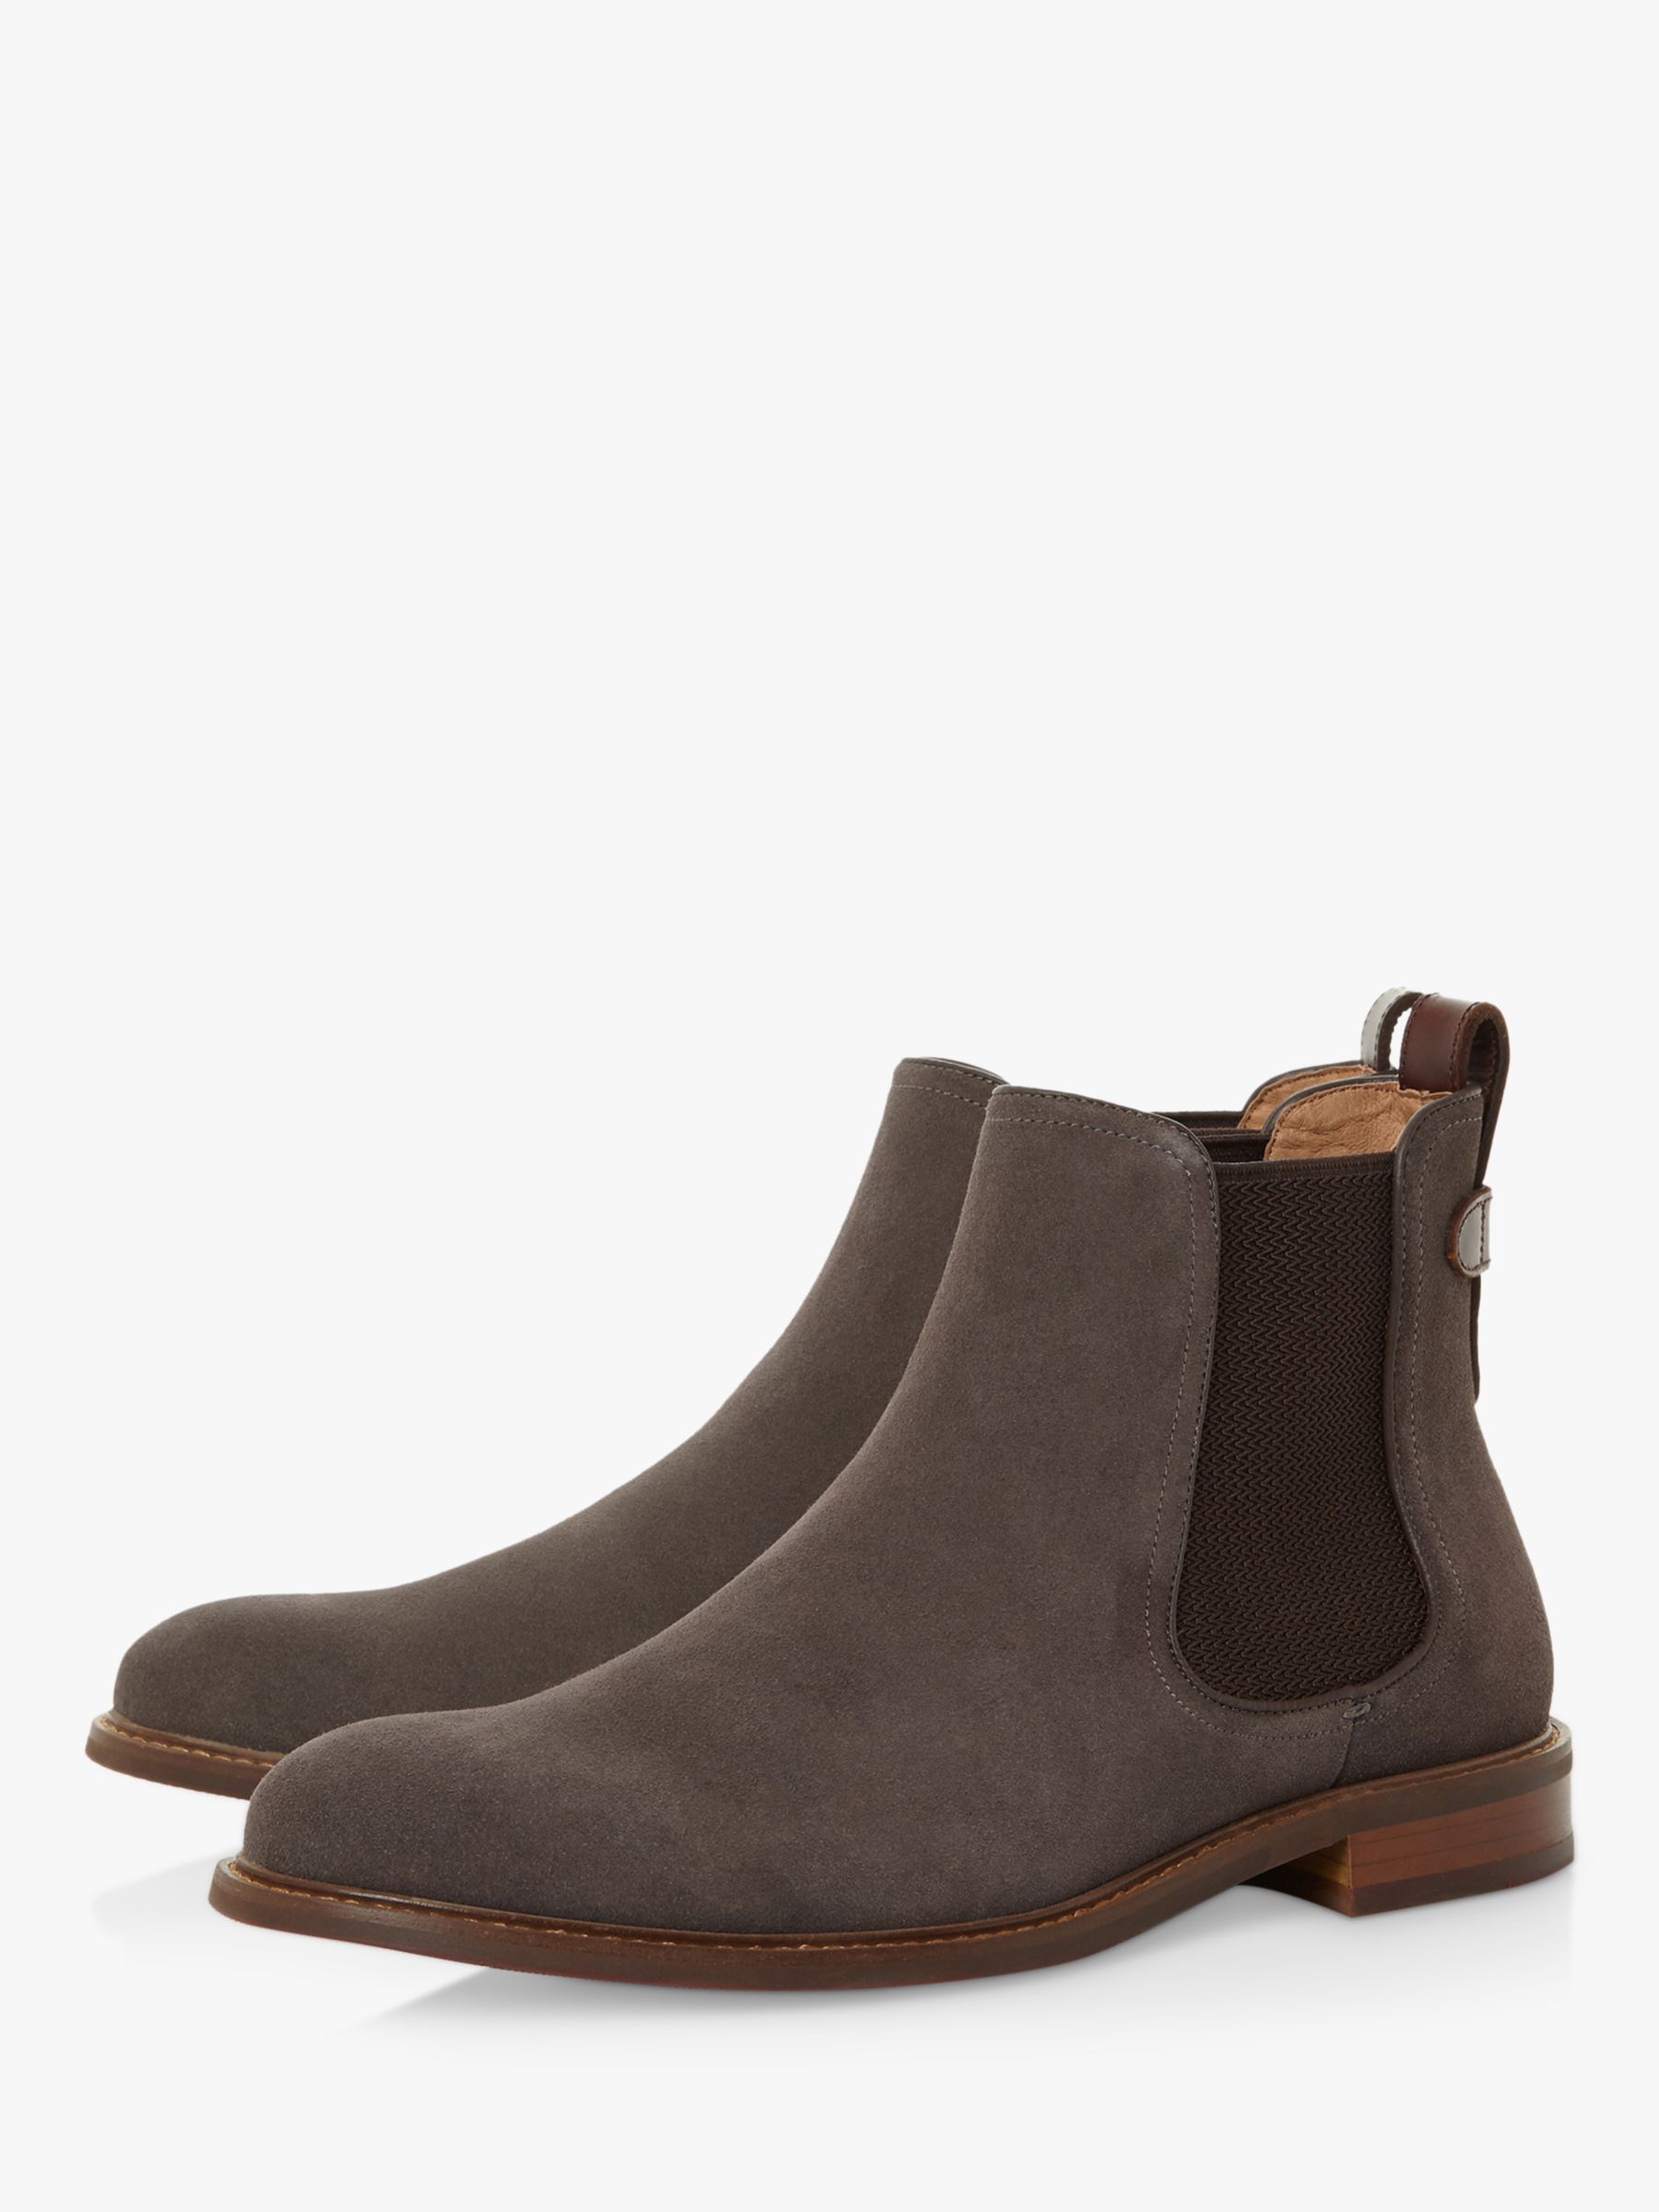 Dune Character Suede Chelsea Boots, Grey at John Lewis & Partners